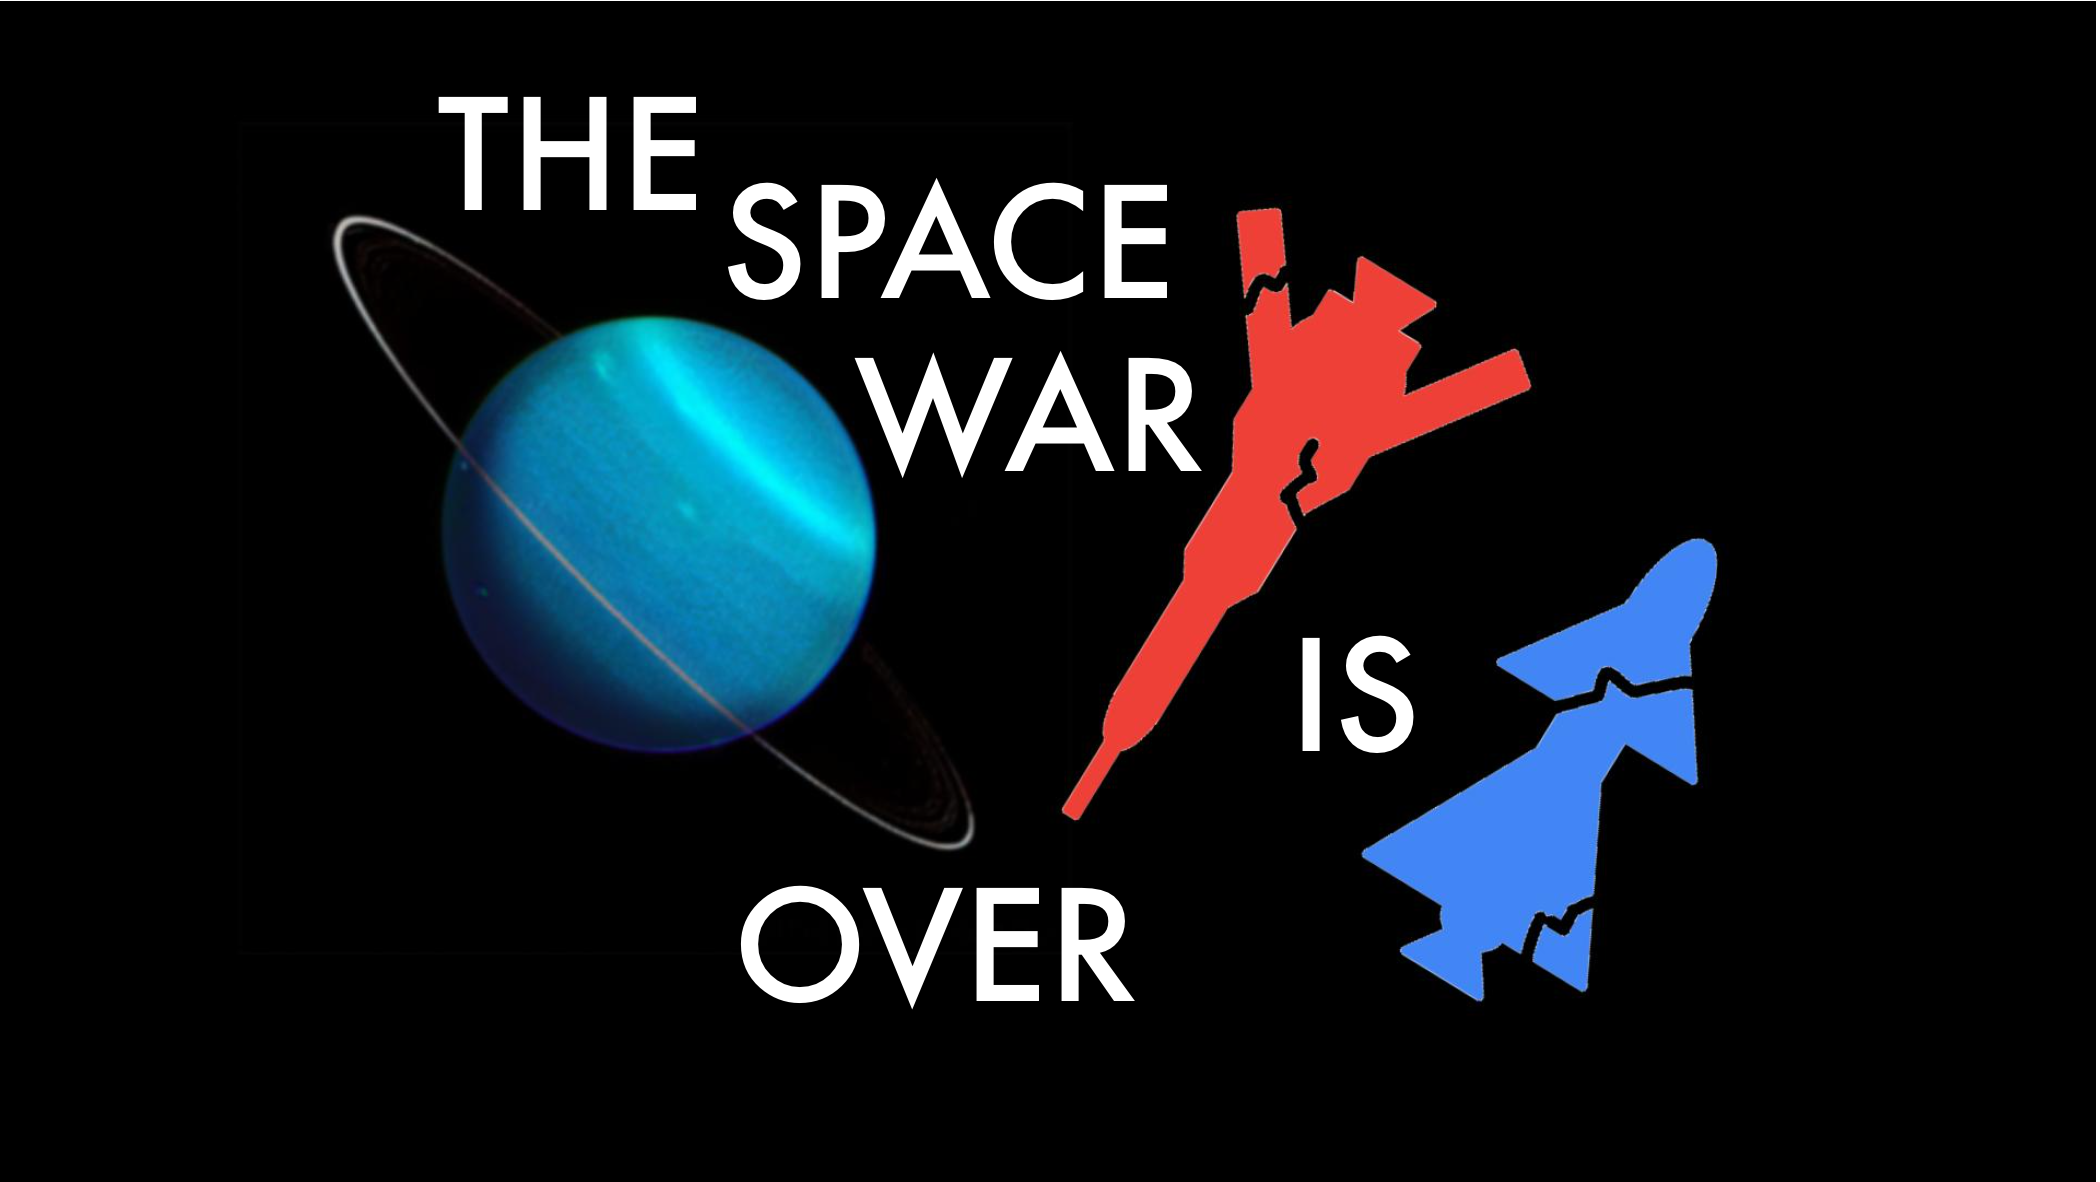 THE SPACE WAR IS OVER